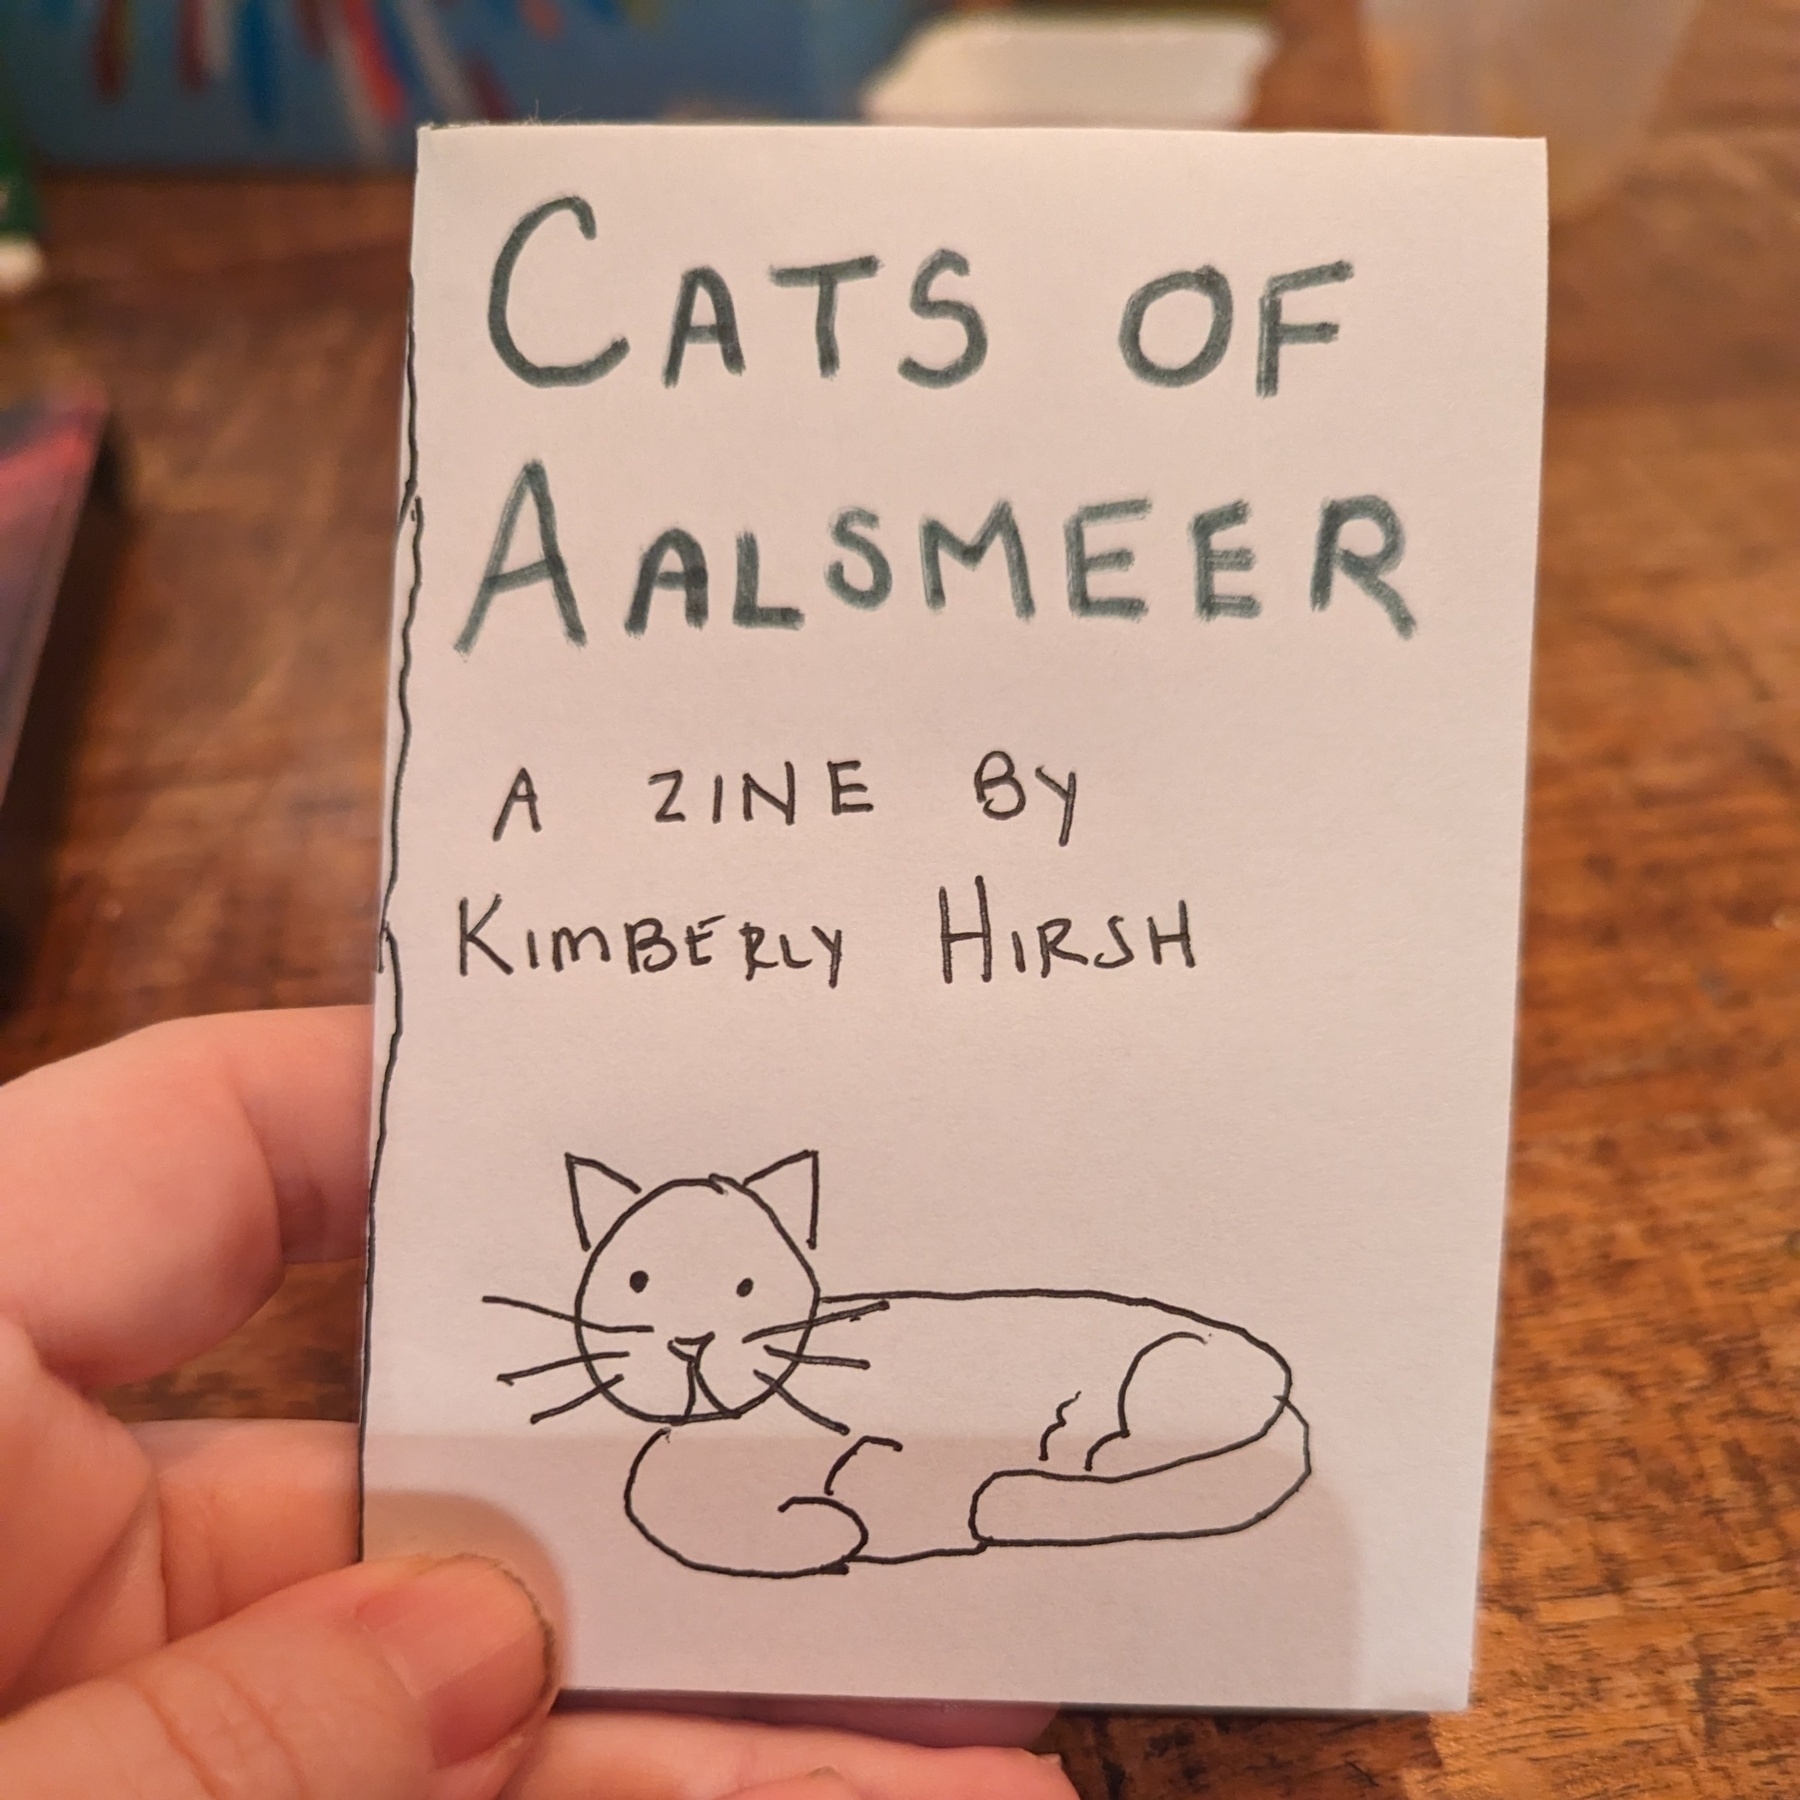 A hand holding a tiny zine that reads 'Cats of Aalsmeer' with a hand-drawn cat face doodle